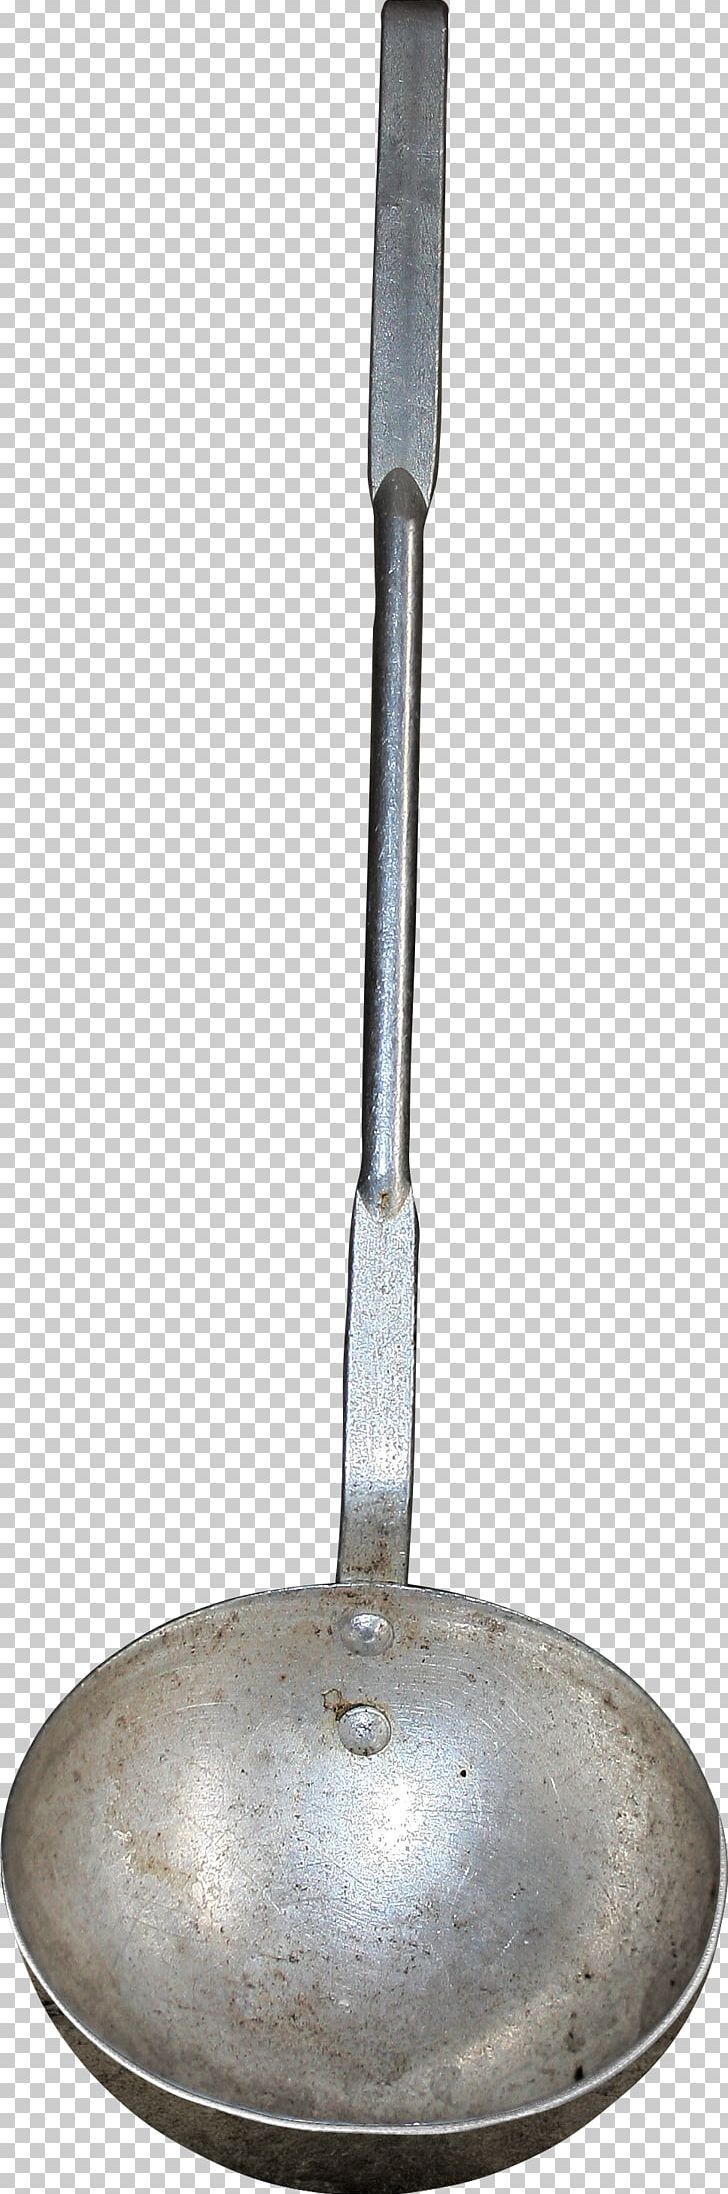 Silver Spoon PNG, Clipart, Decoration, Download, Material, Metal, Silver Free PNG Download